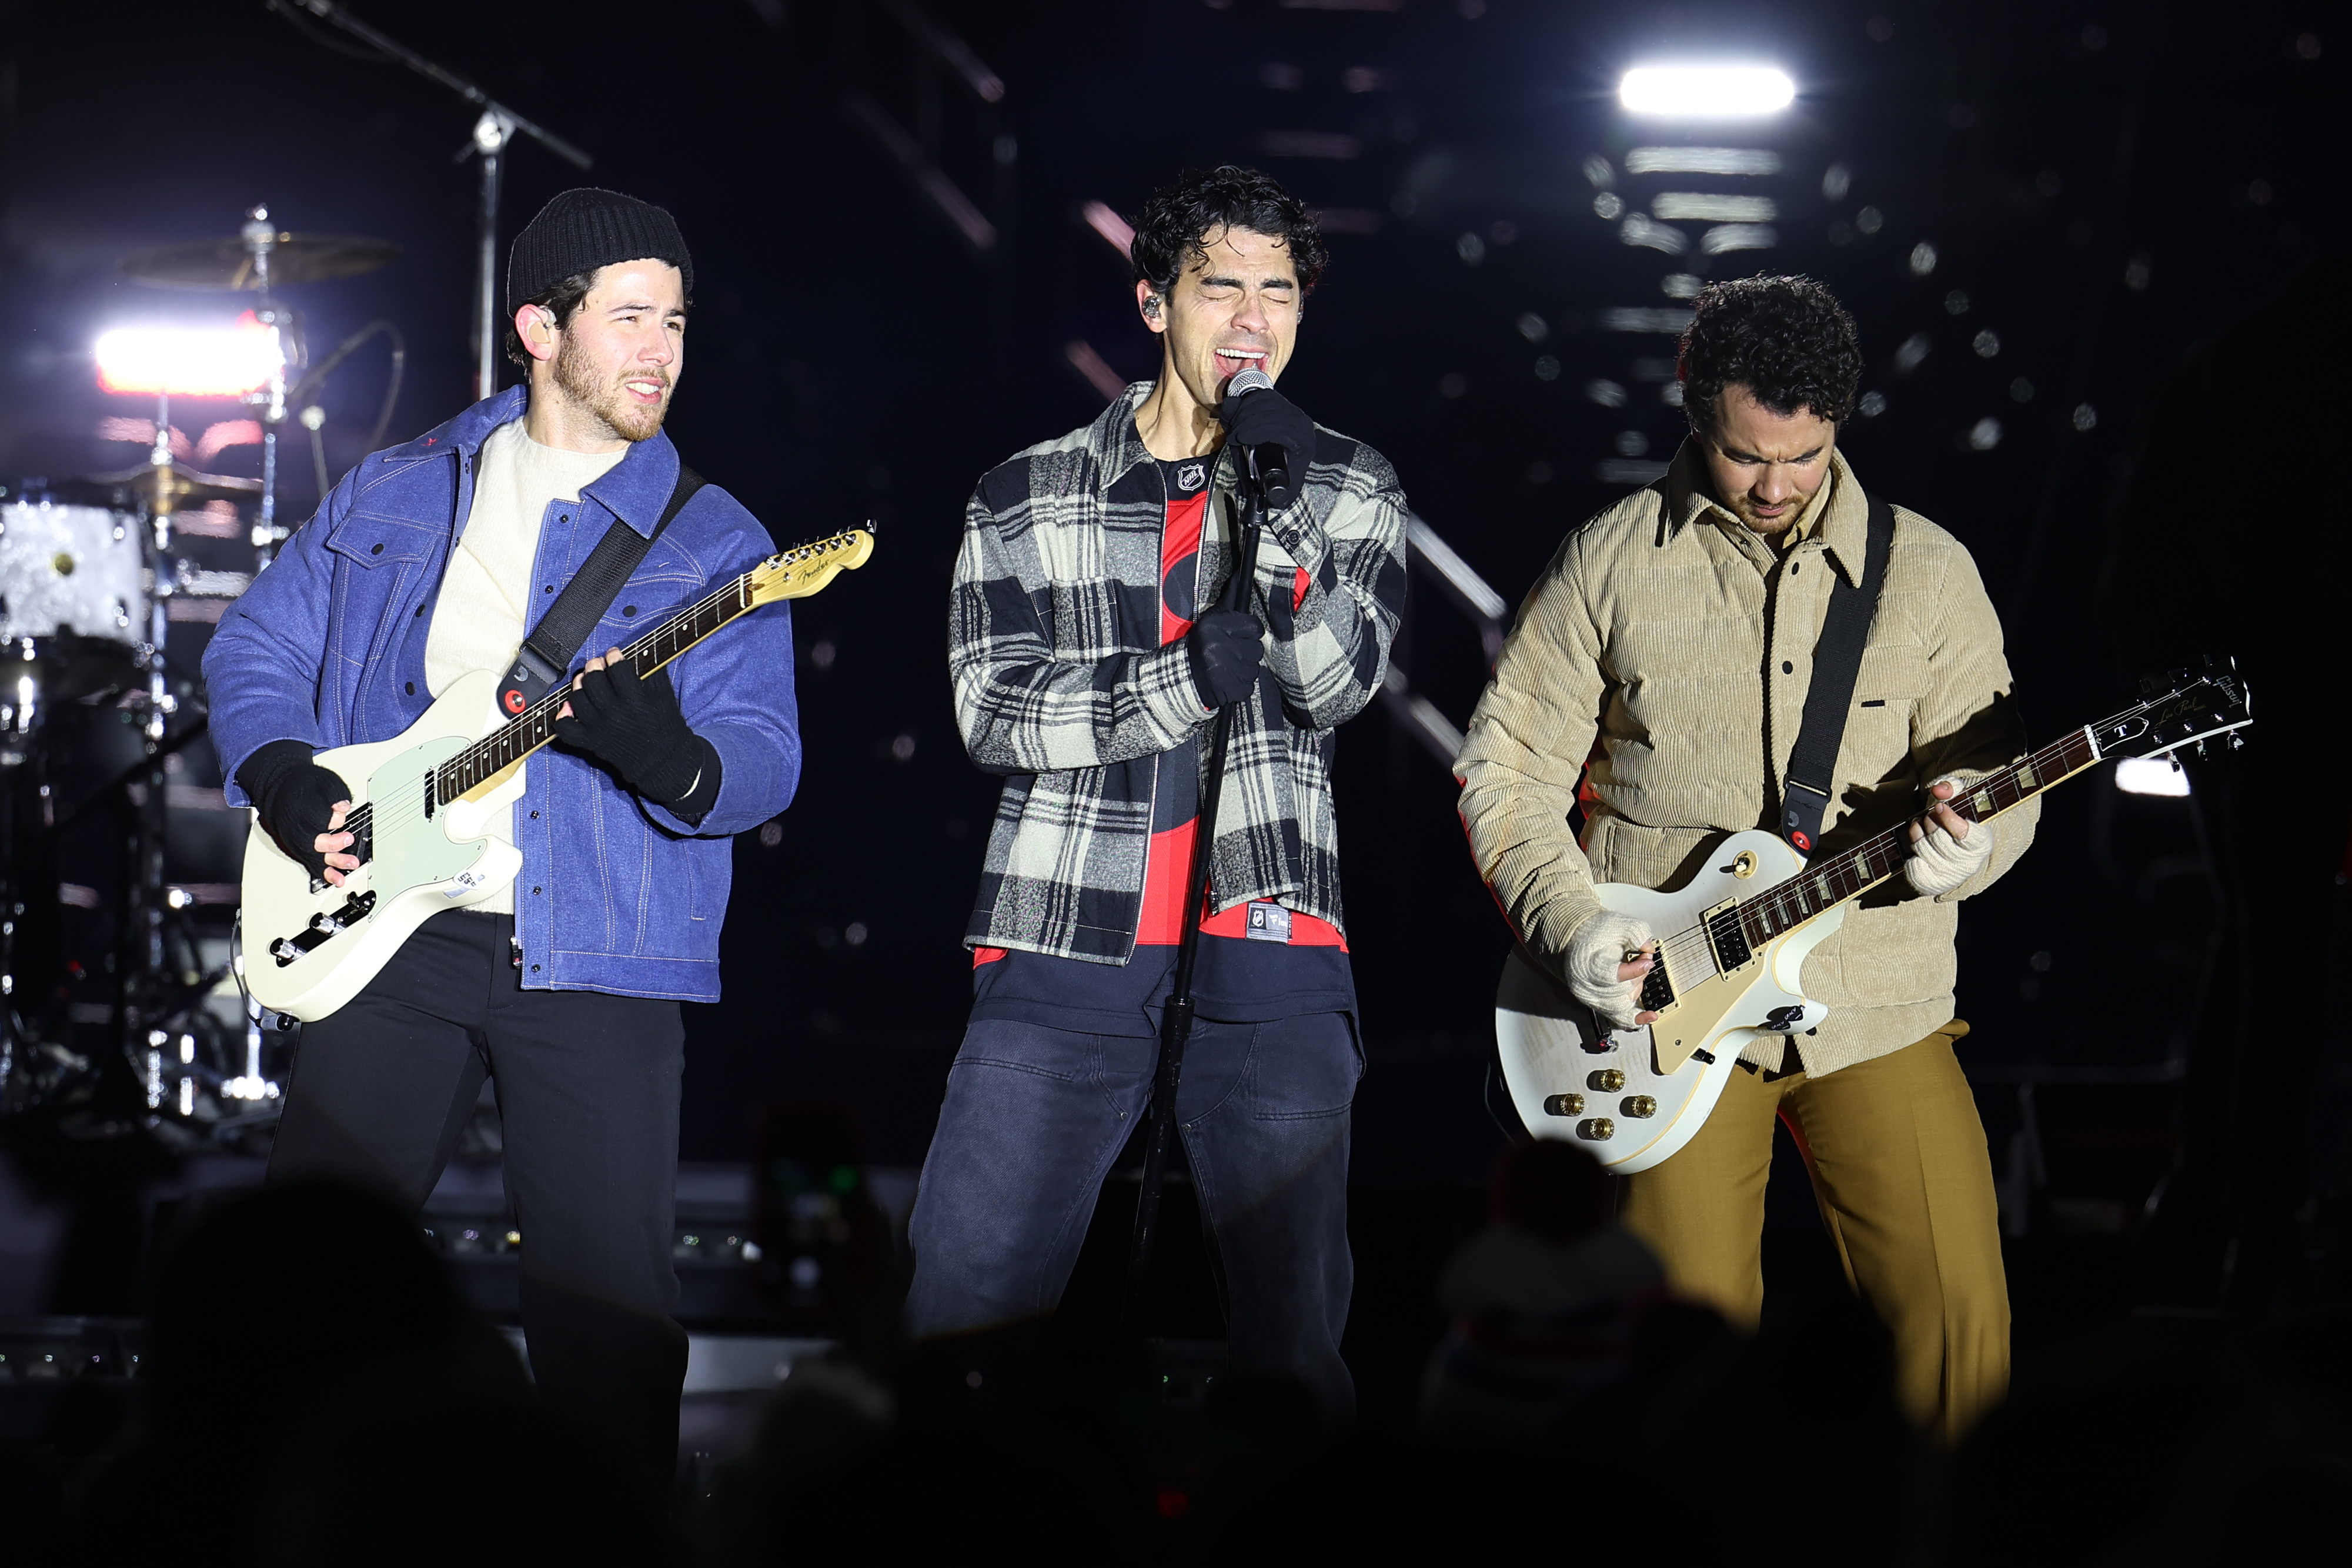 The Jonas Brothers perform on stage with guitars and a microphone